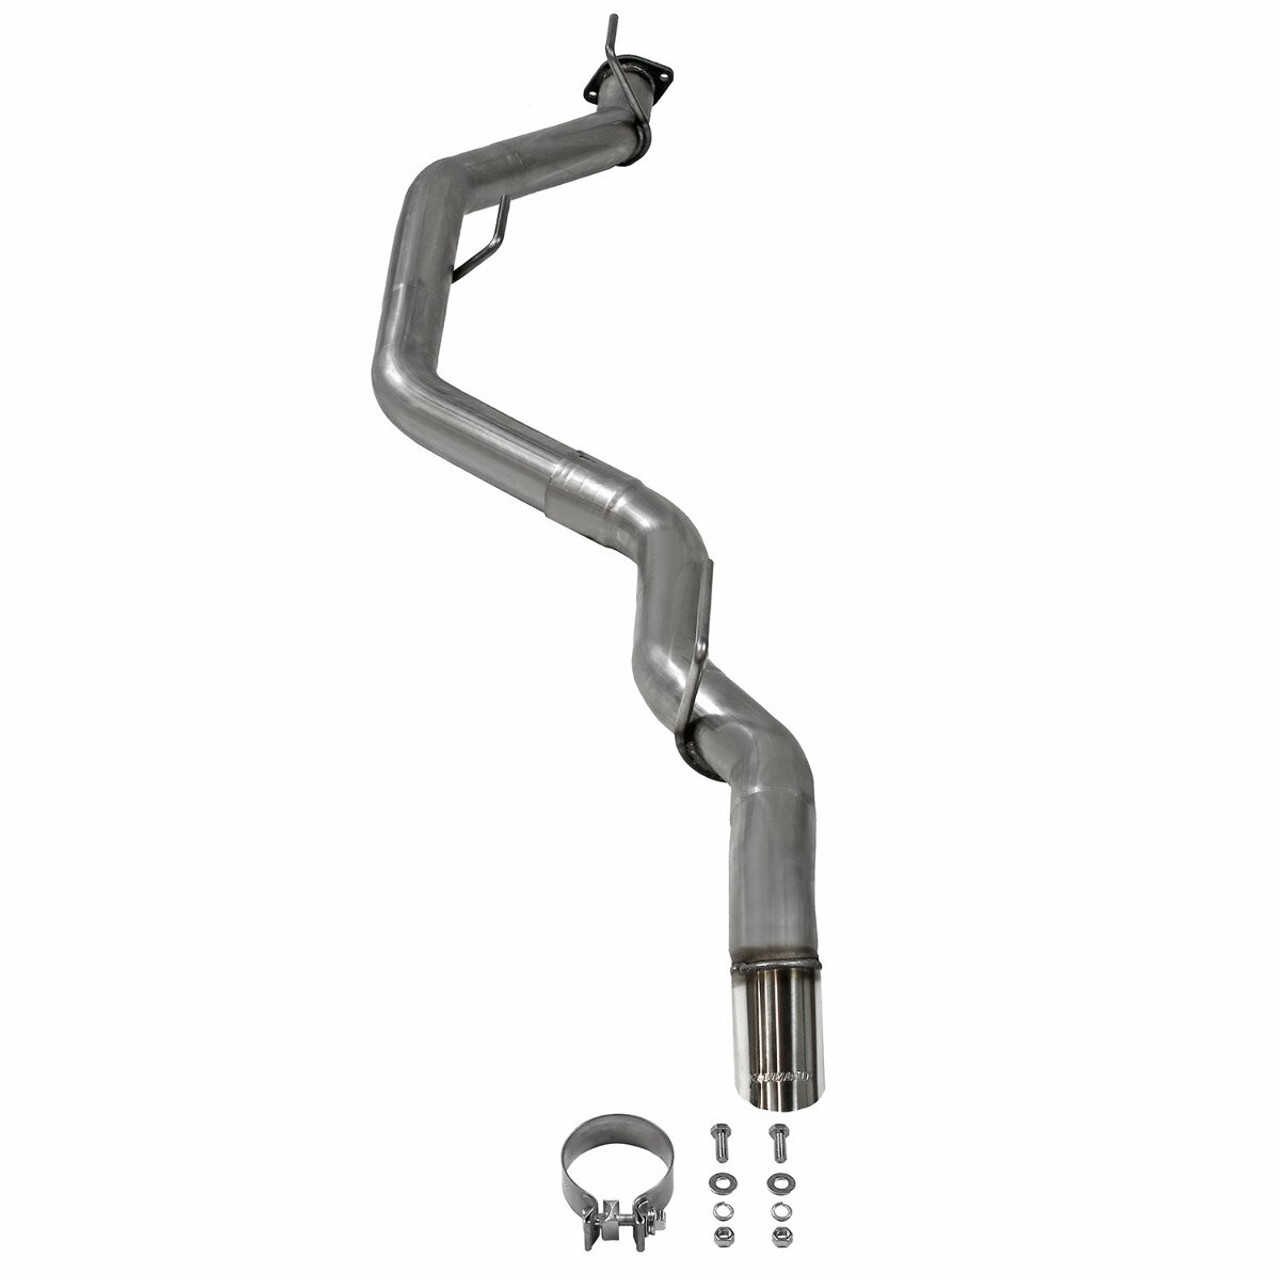 Flowmaster American Thunder Exhaust System 20-23 Jeep Gladiator JT 3.0  818131 Performance-Curve